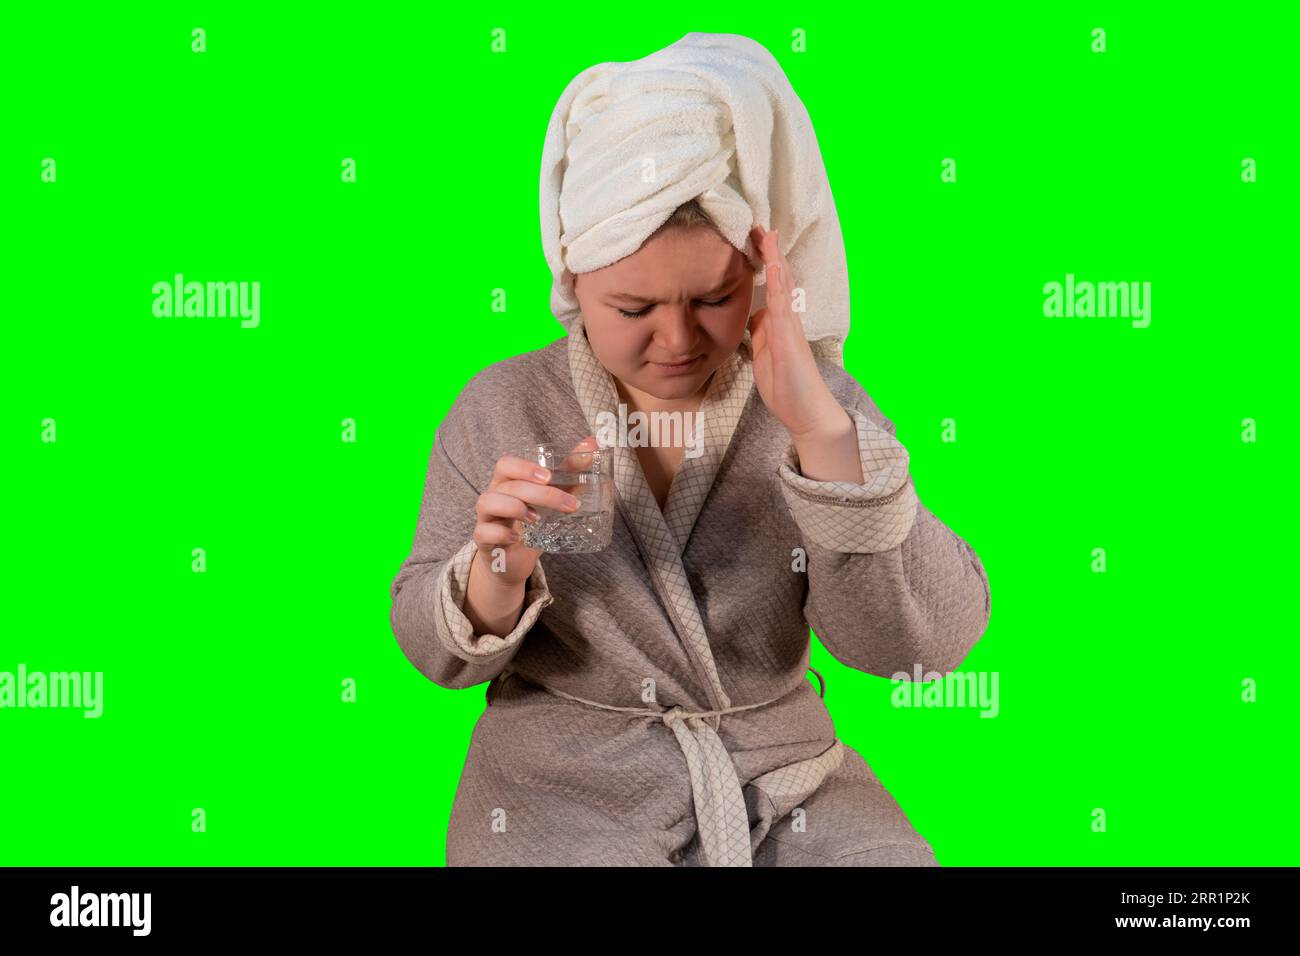 Girl with symptoms of a cold holds a glass of water in her hand on a green background (chroma key). Headache. Concept of medicine and home treatment Stock Photo